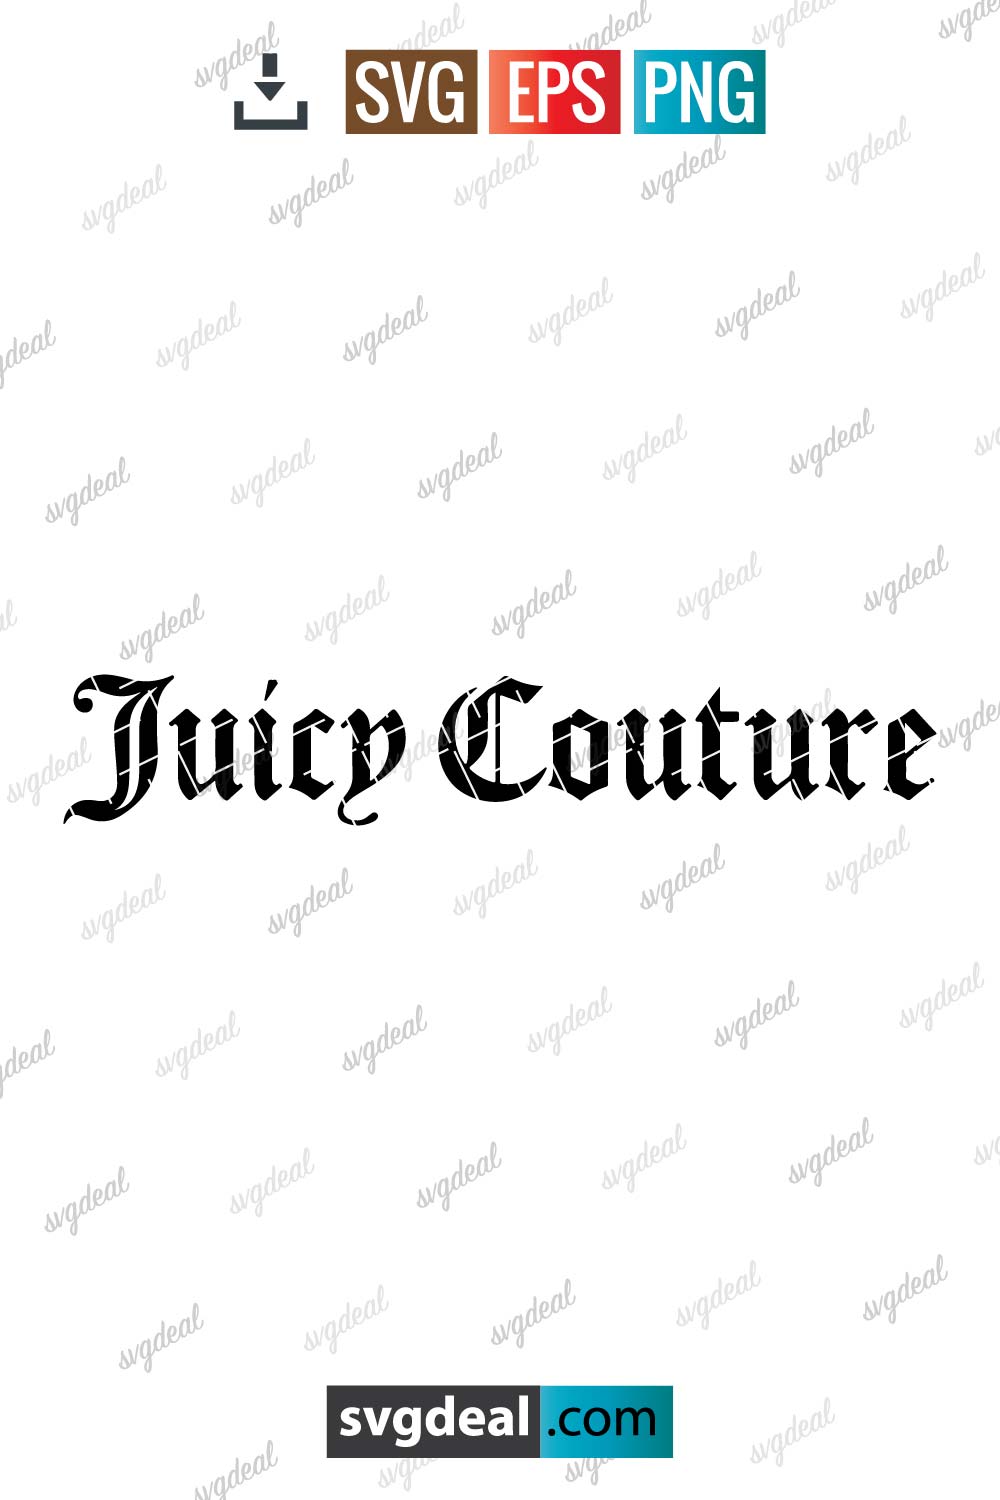 Free Juicy Couture Svg - SVGDeal.com